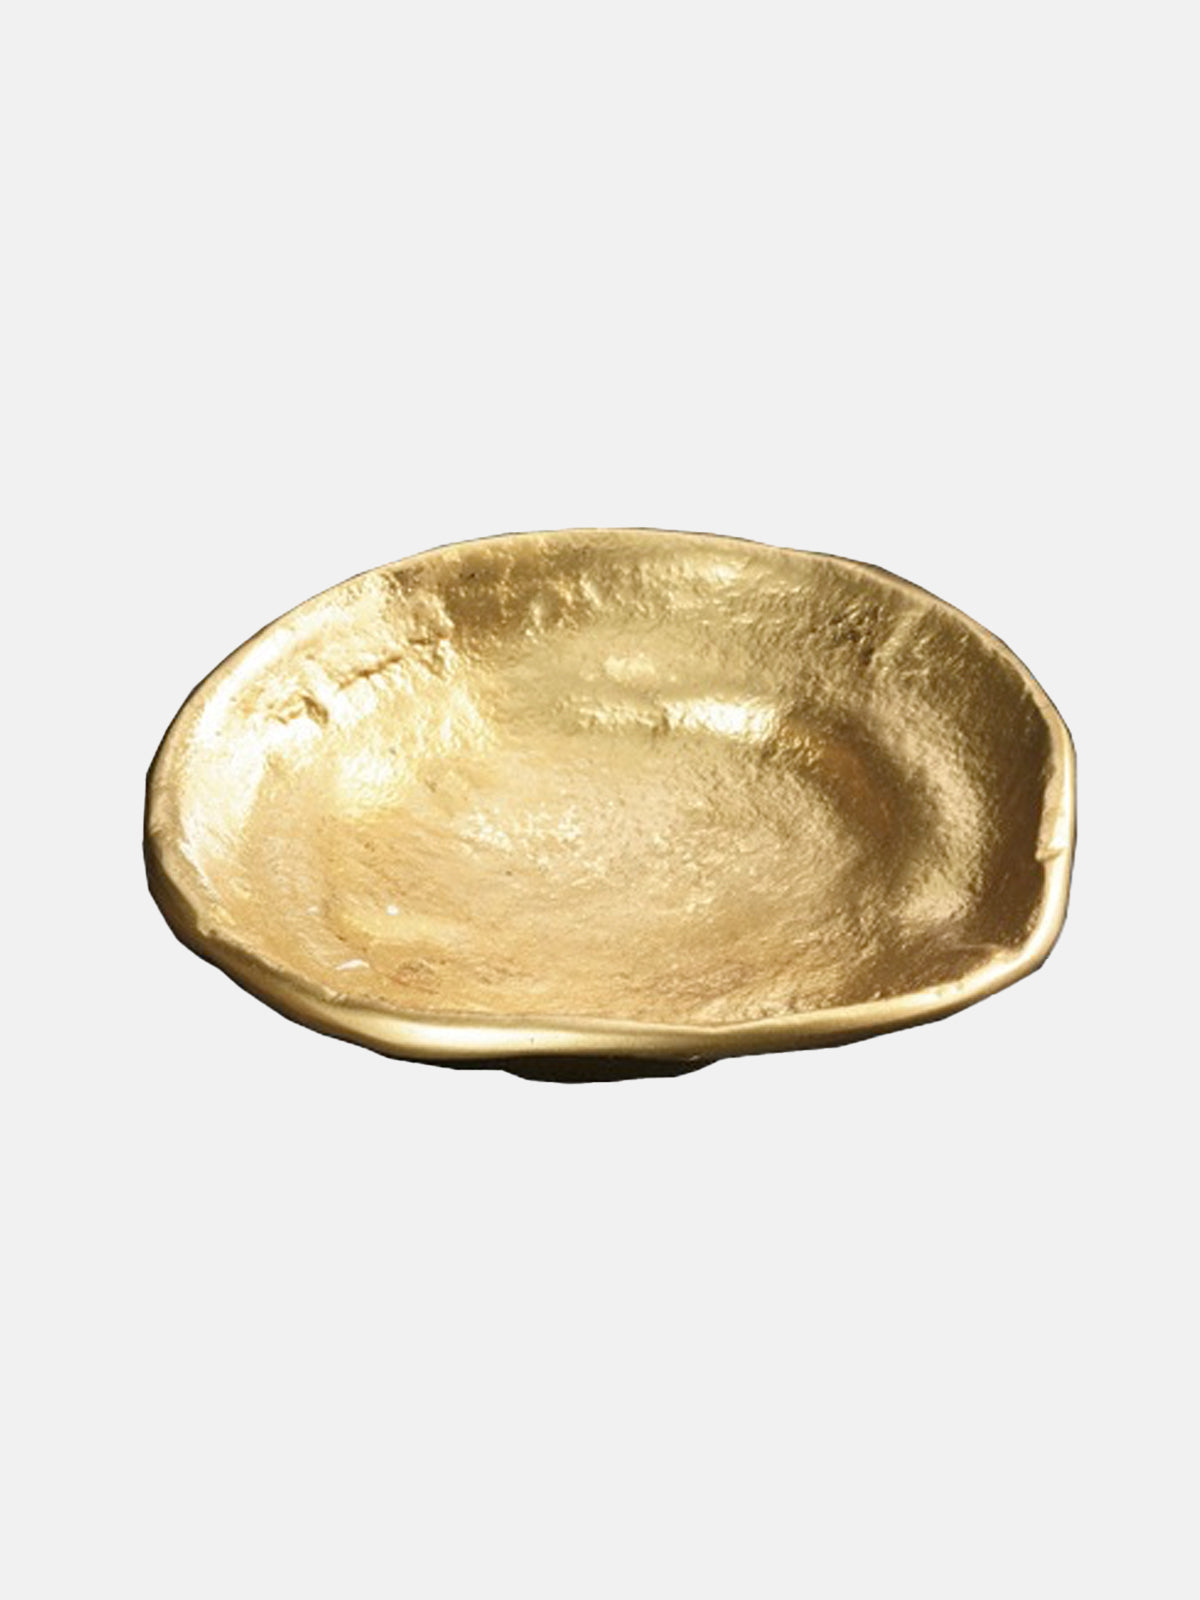 OOAK Gilded Gold Dish